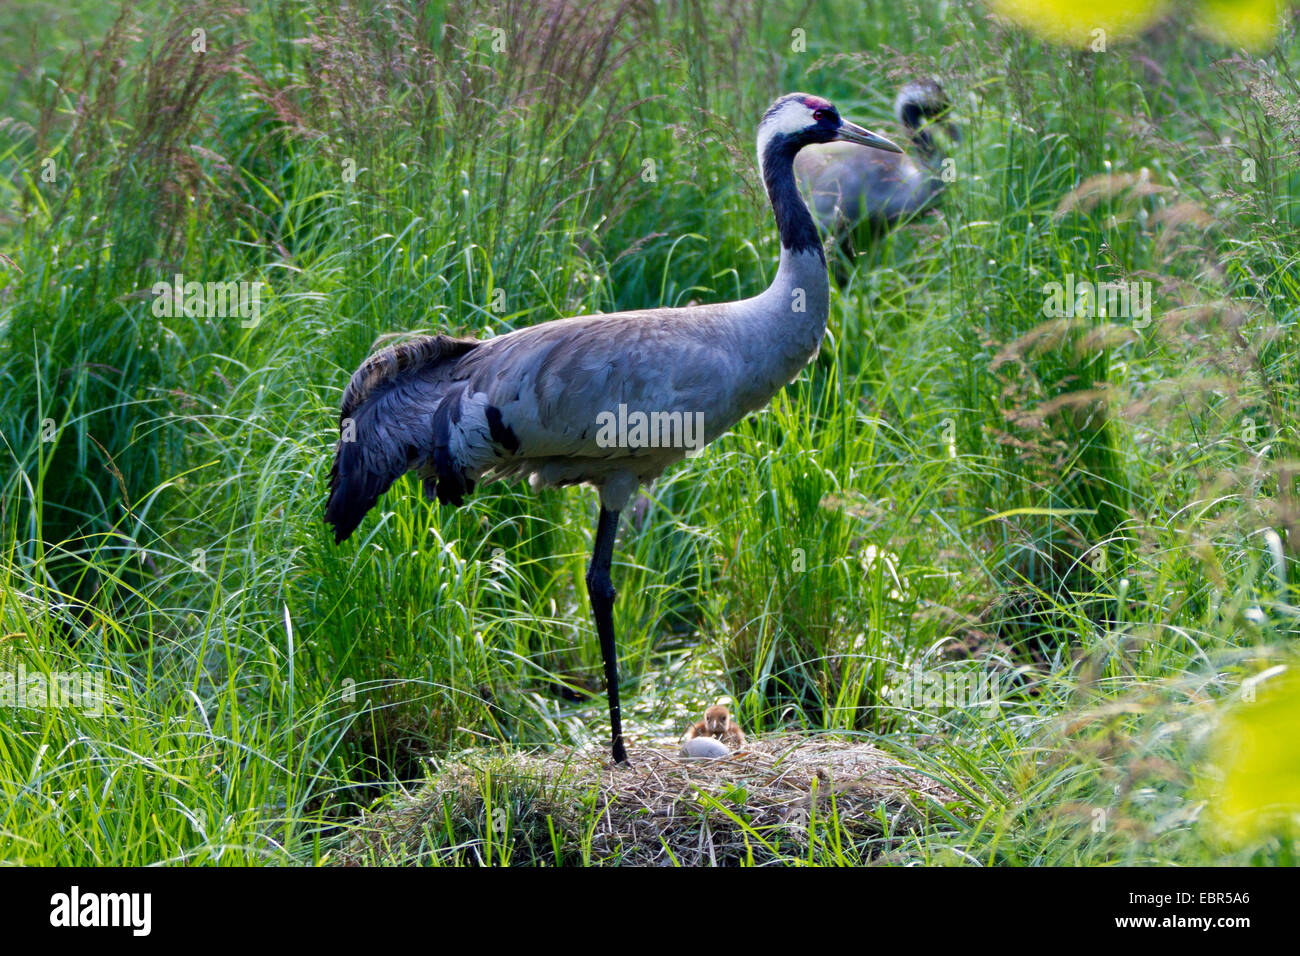 Common crane, Eurasian Crane (Grus grus), parents at the nest with chick and egg, Germany, Mecklenburg-Western Pomerania Stock Photo